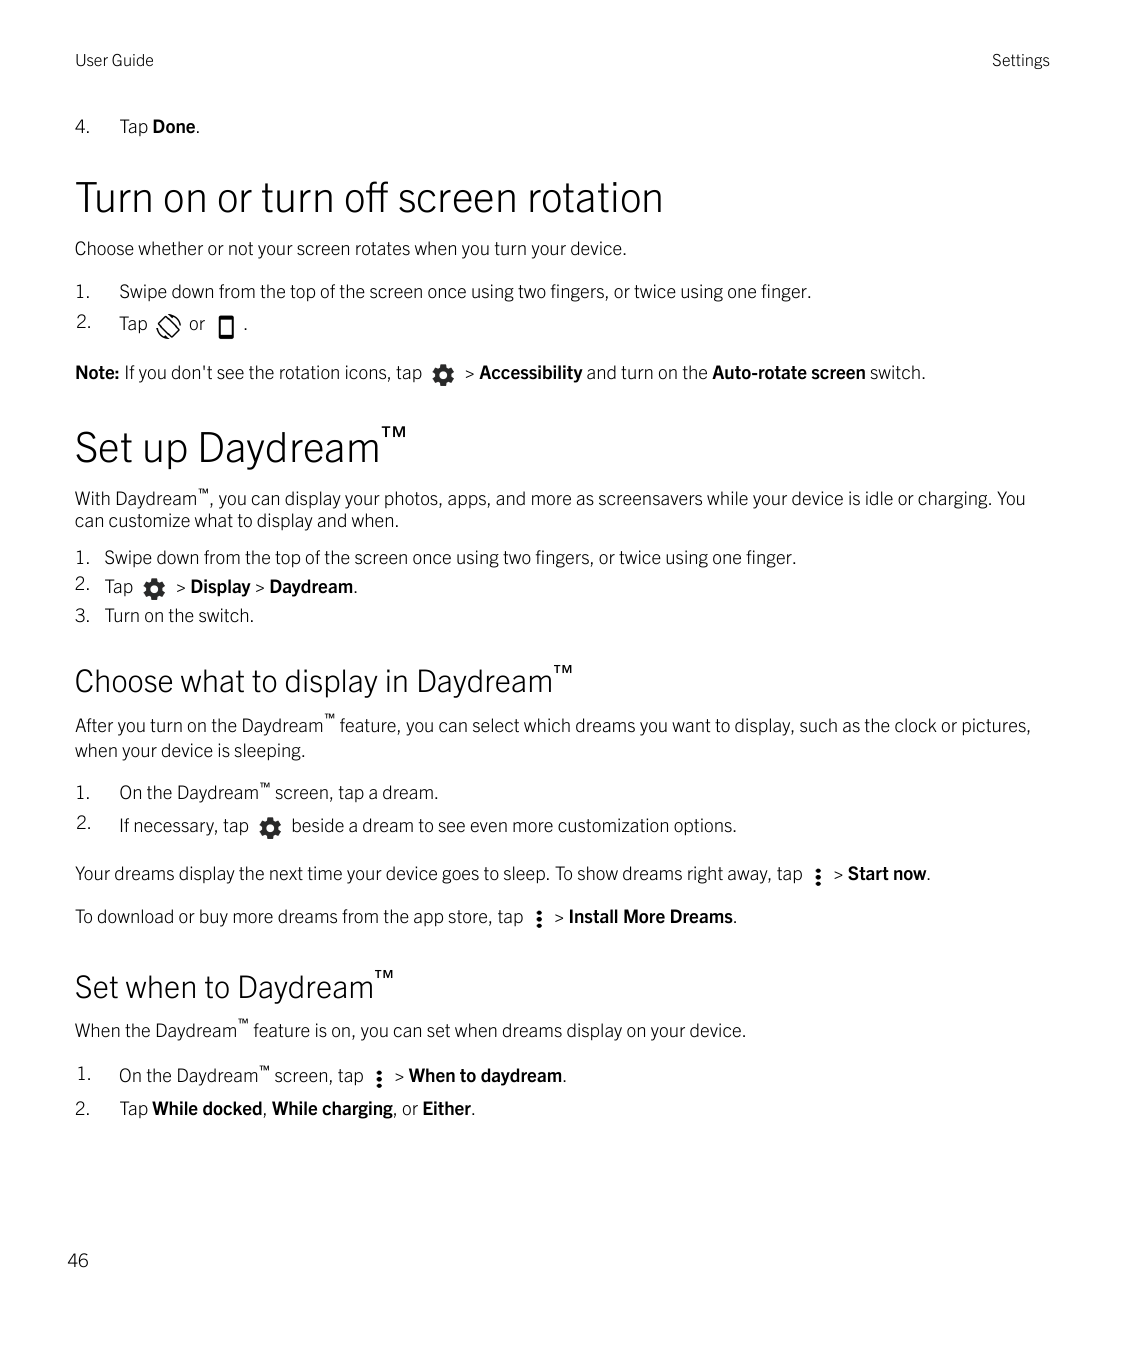 User Guide4.SettingsTap Done.Turn on or turn off screen rotationChoose whether or not your screen rotates when you turn your dev